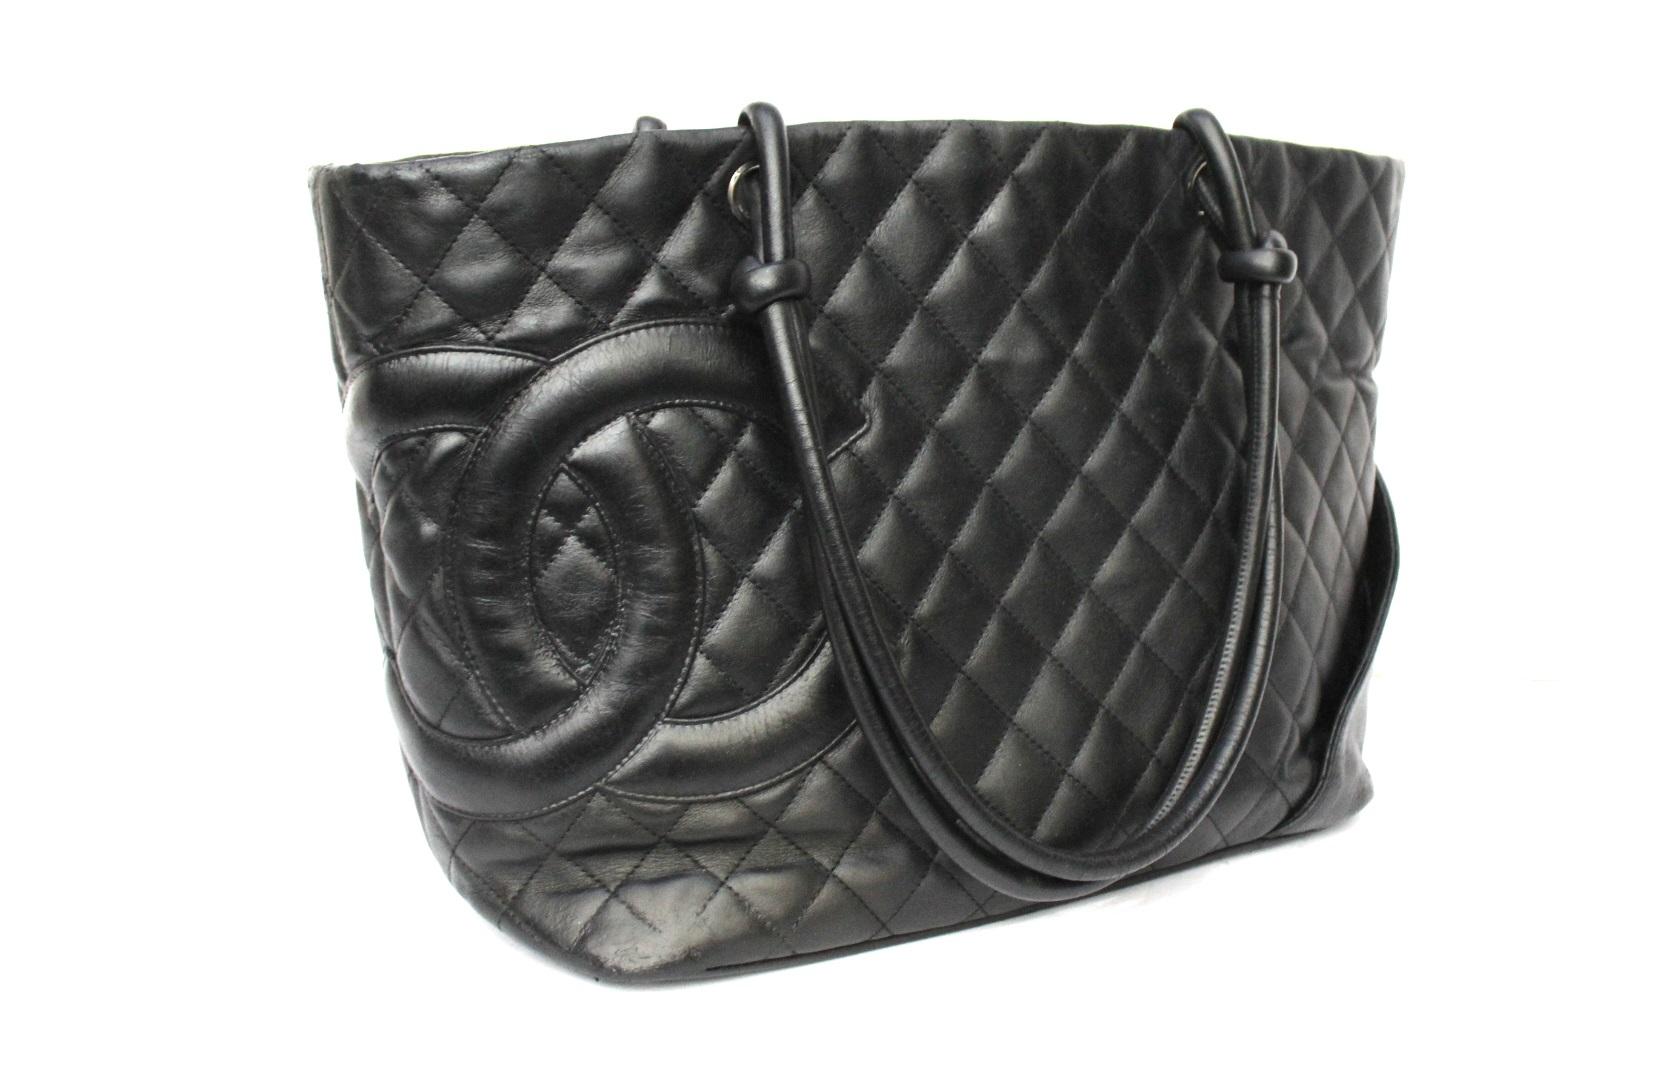 Chanel Cambon shopper bag in black leather.

Equipped with double leather handle, zip closure, very large inside (it has some stains).

Externally the bag is in excellent condition.